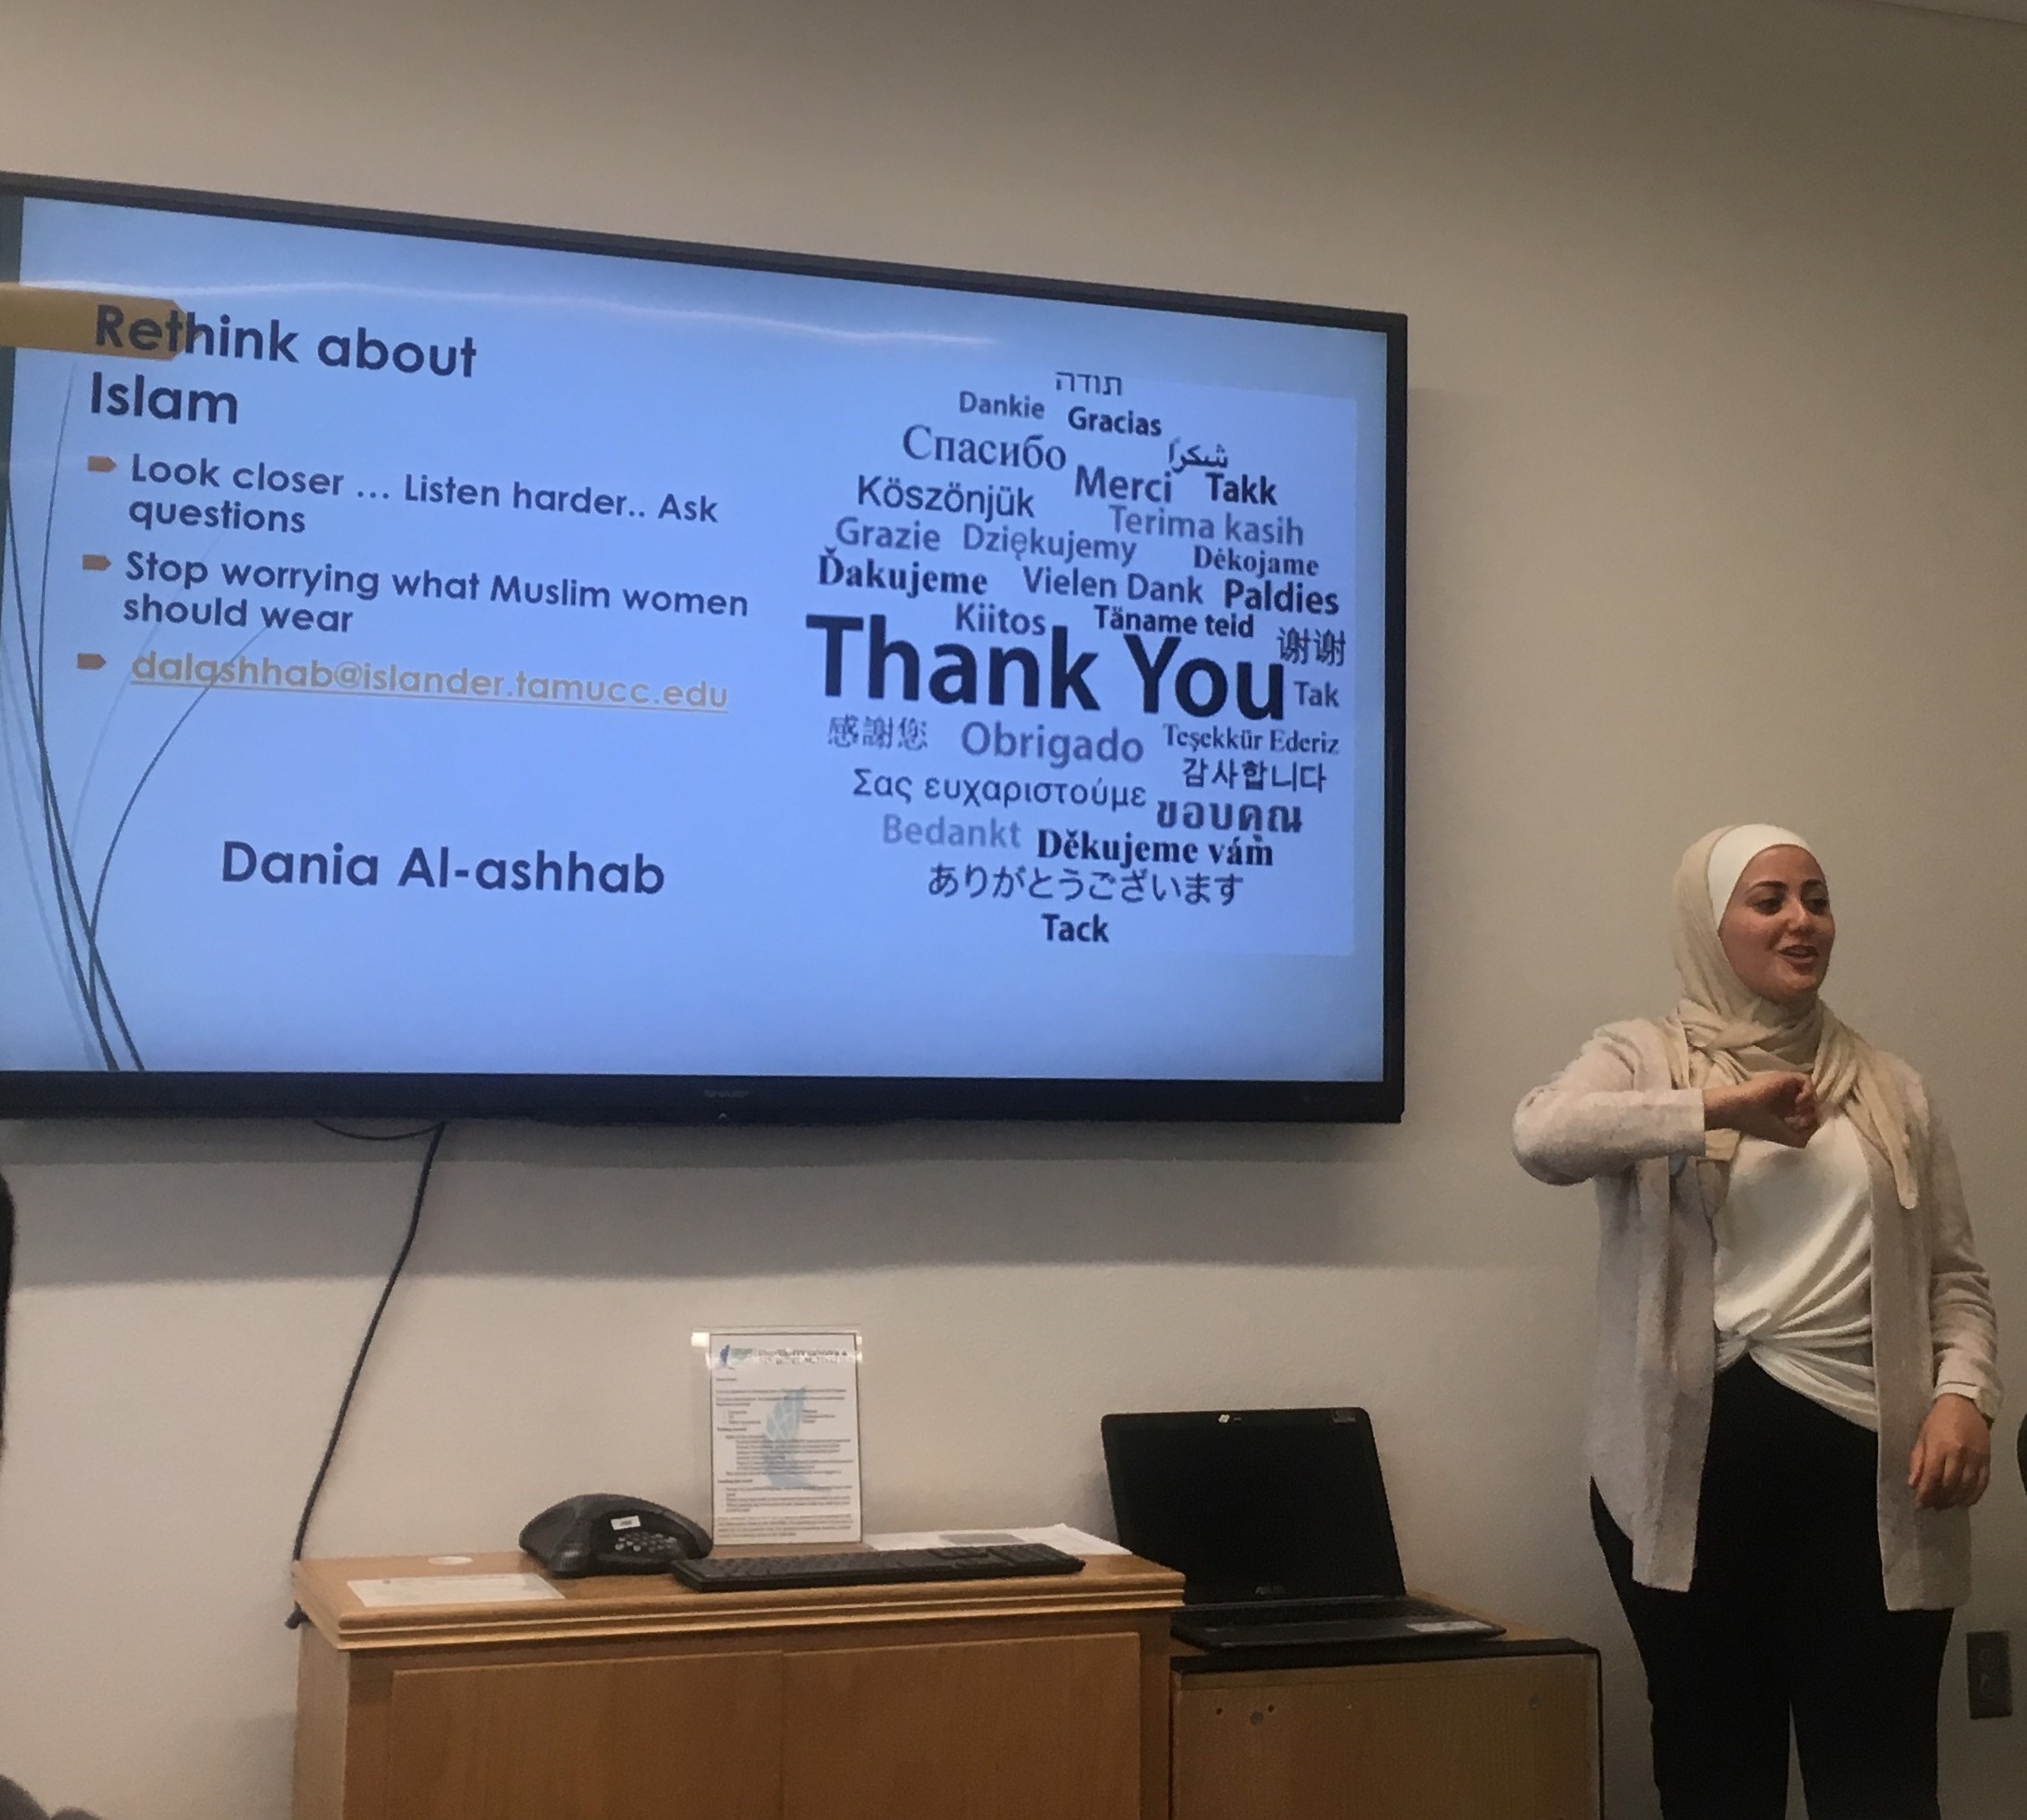 Symantec Racial Equity Fellows image: Fulbright Scholar Dania Al-ashhab delivering a presentation on Breaking Stereotypes